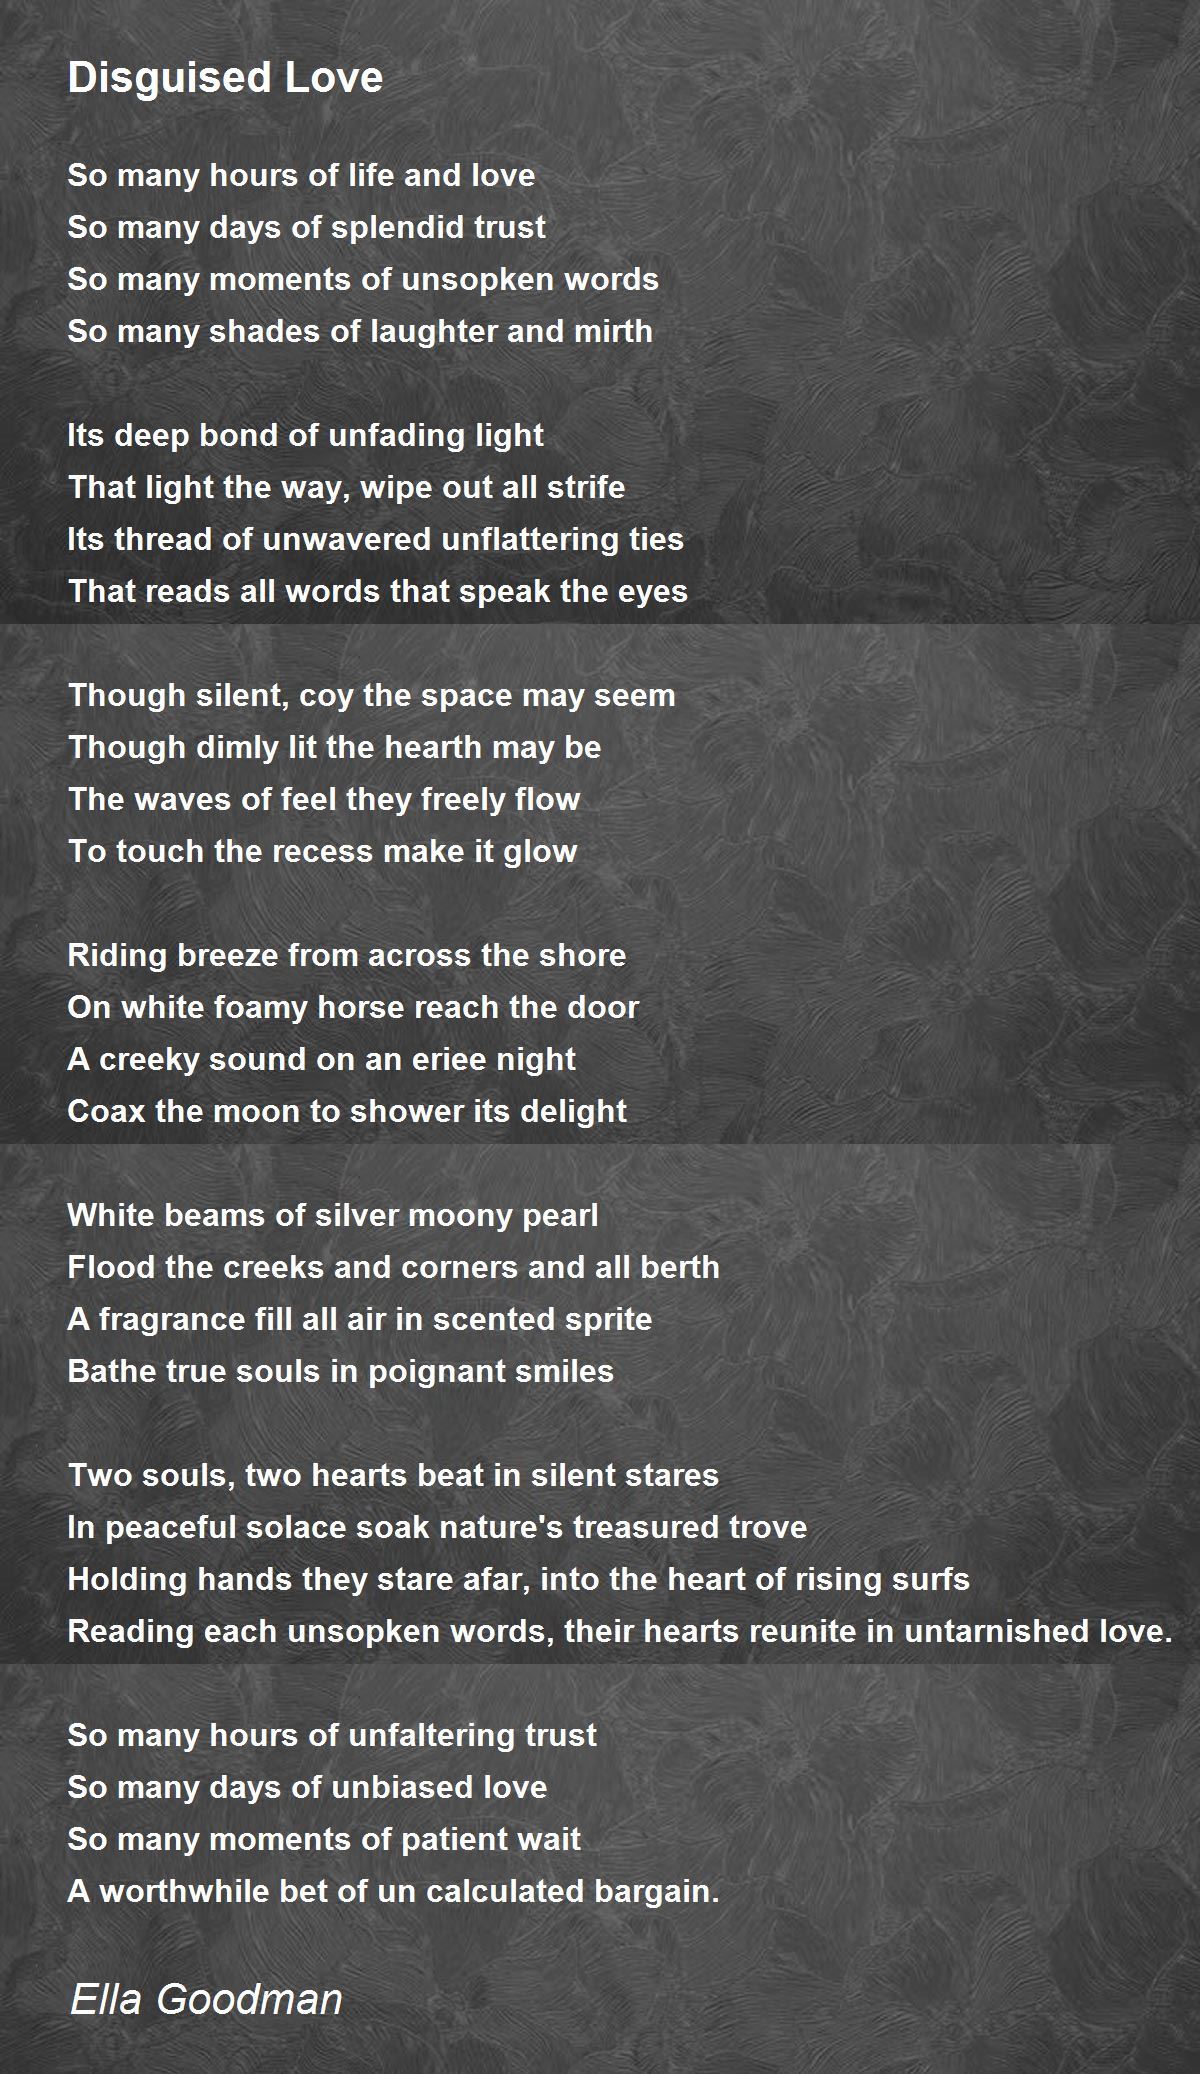 OC] A scroll of sending disguised as a love poem. Can you guess